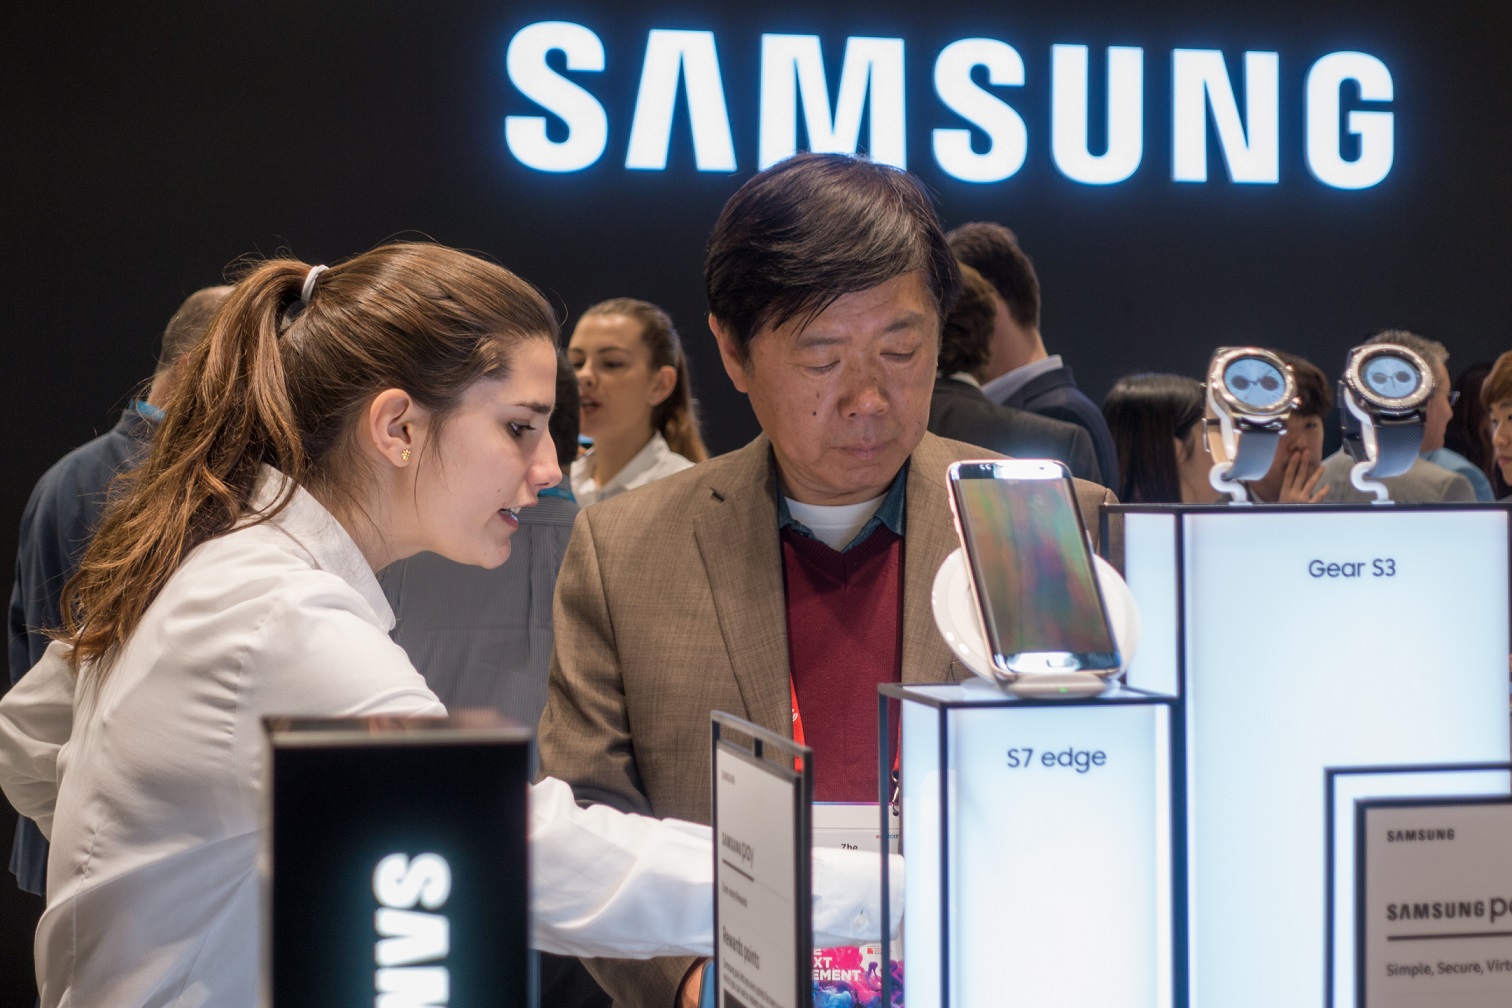 All eyes on Samsung as the Galaxy S8 launches